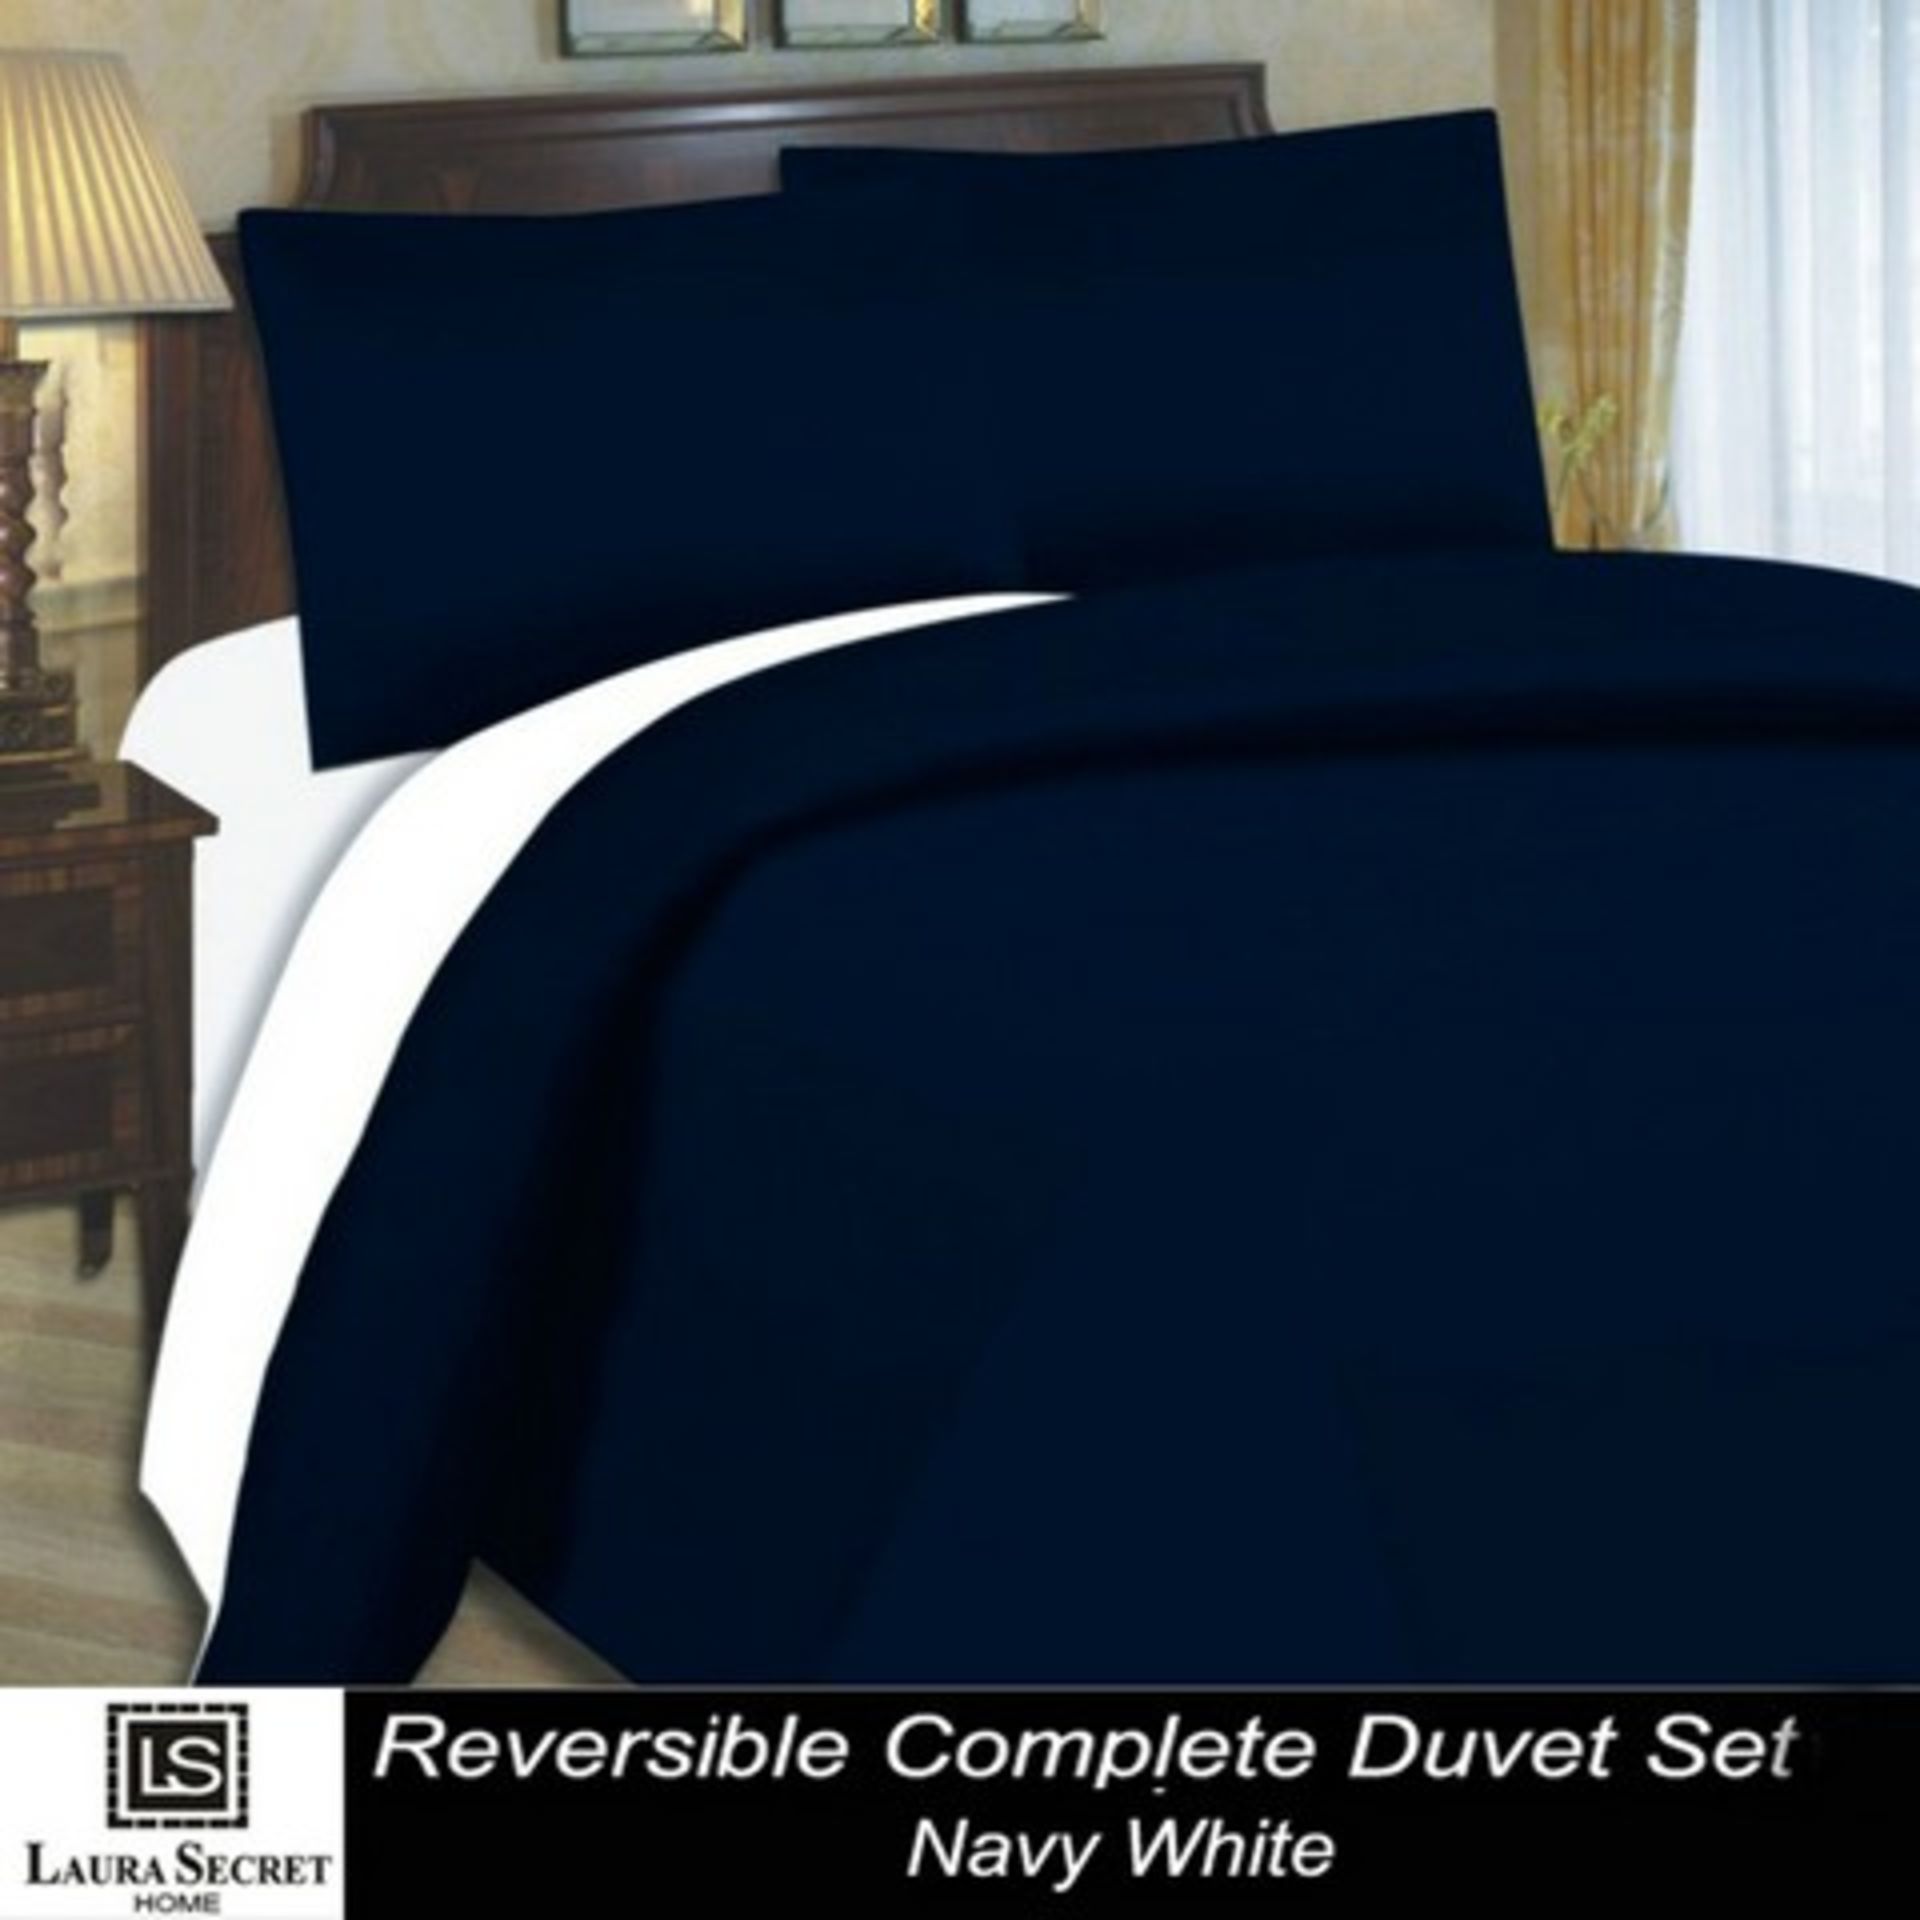 V Brand New Complete 4 Piece Double Bed Set Reversible Navy and White - Includes - Duvet Cover - 2